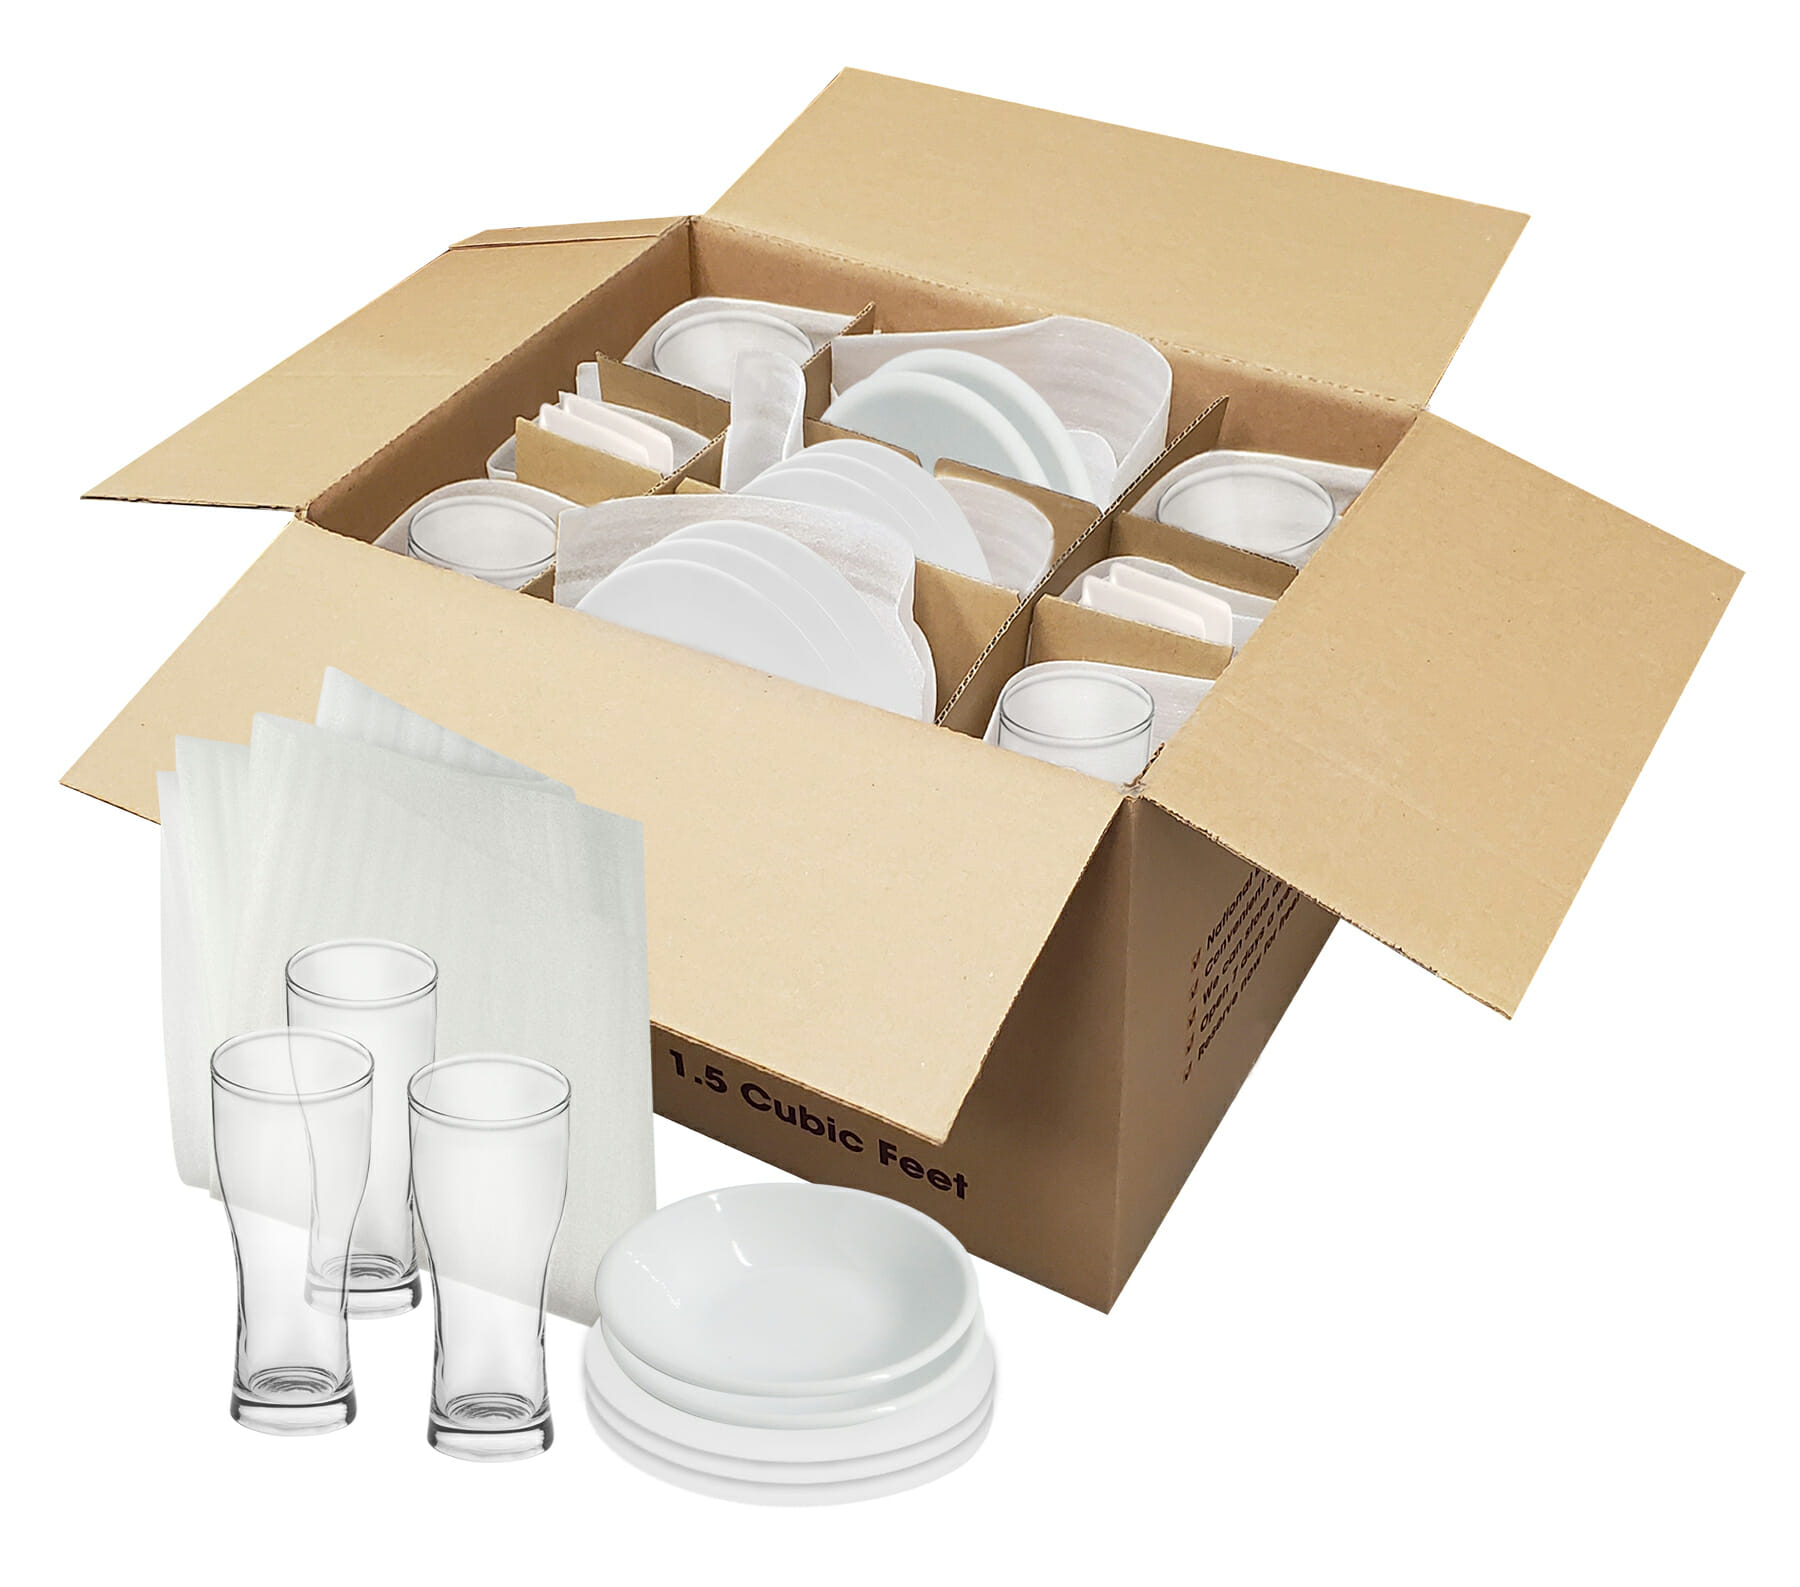 Dish Pack Kit for small moving box